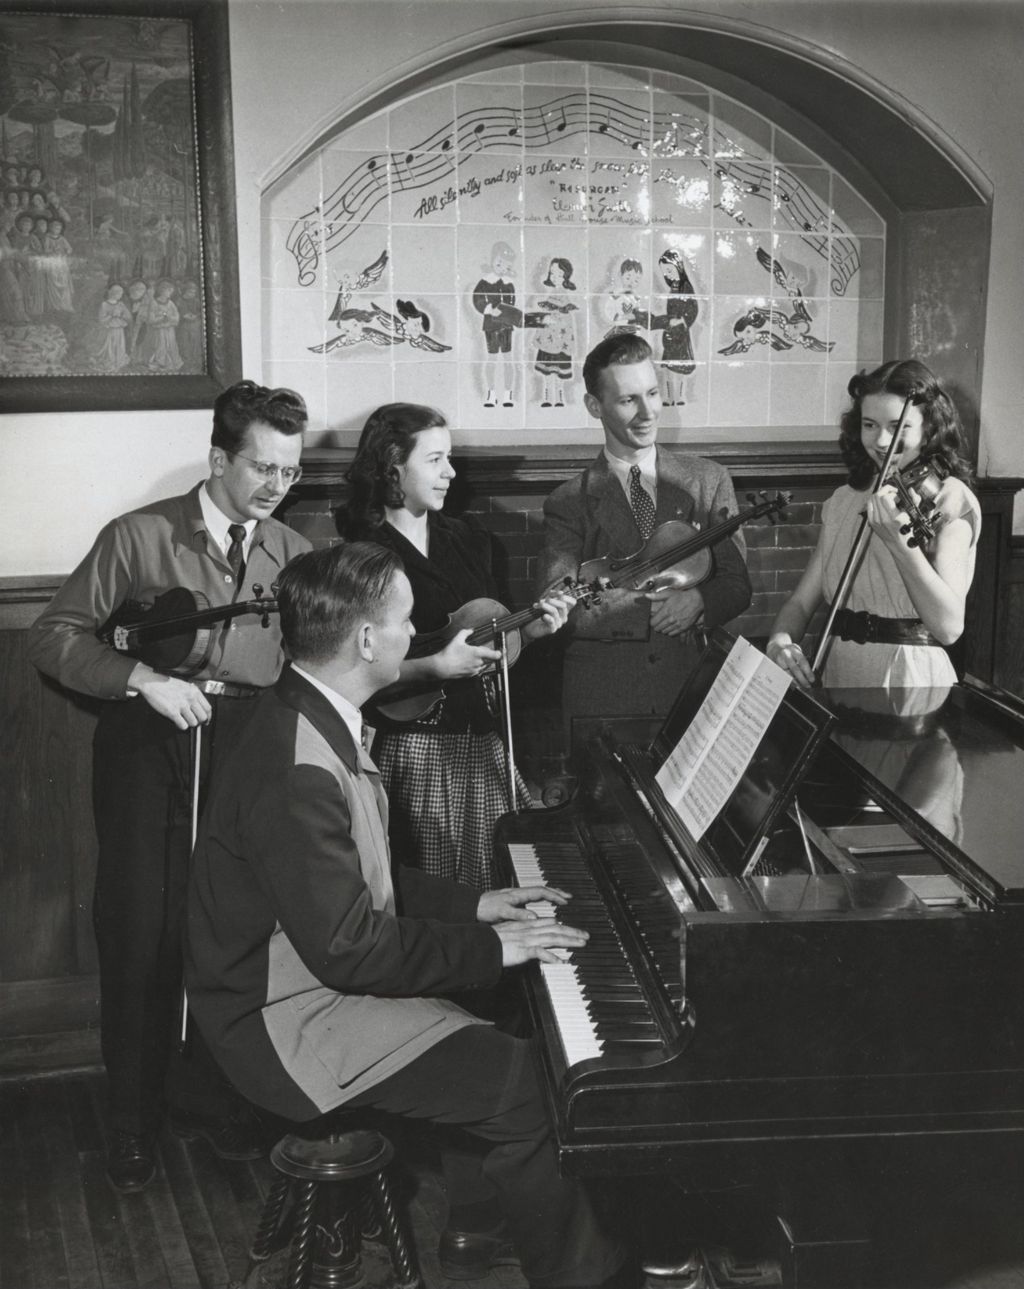 Young woman playing violin as four other musicians look on